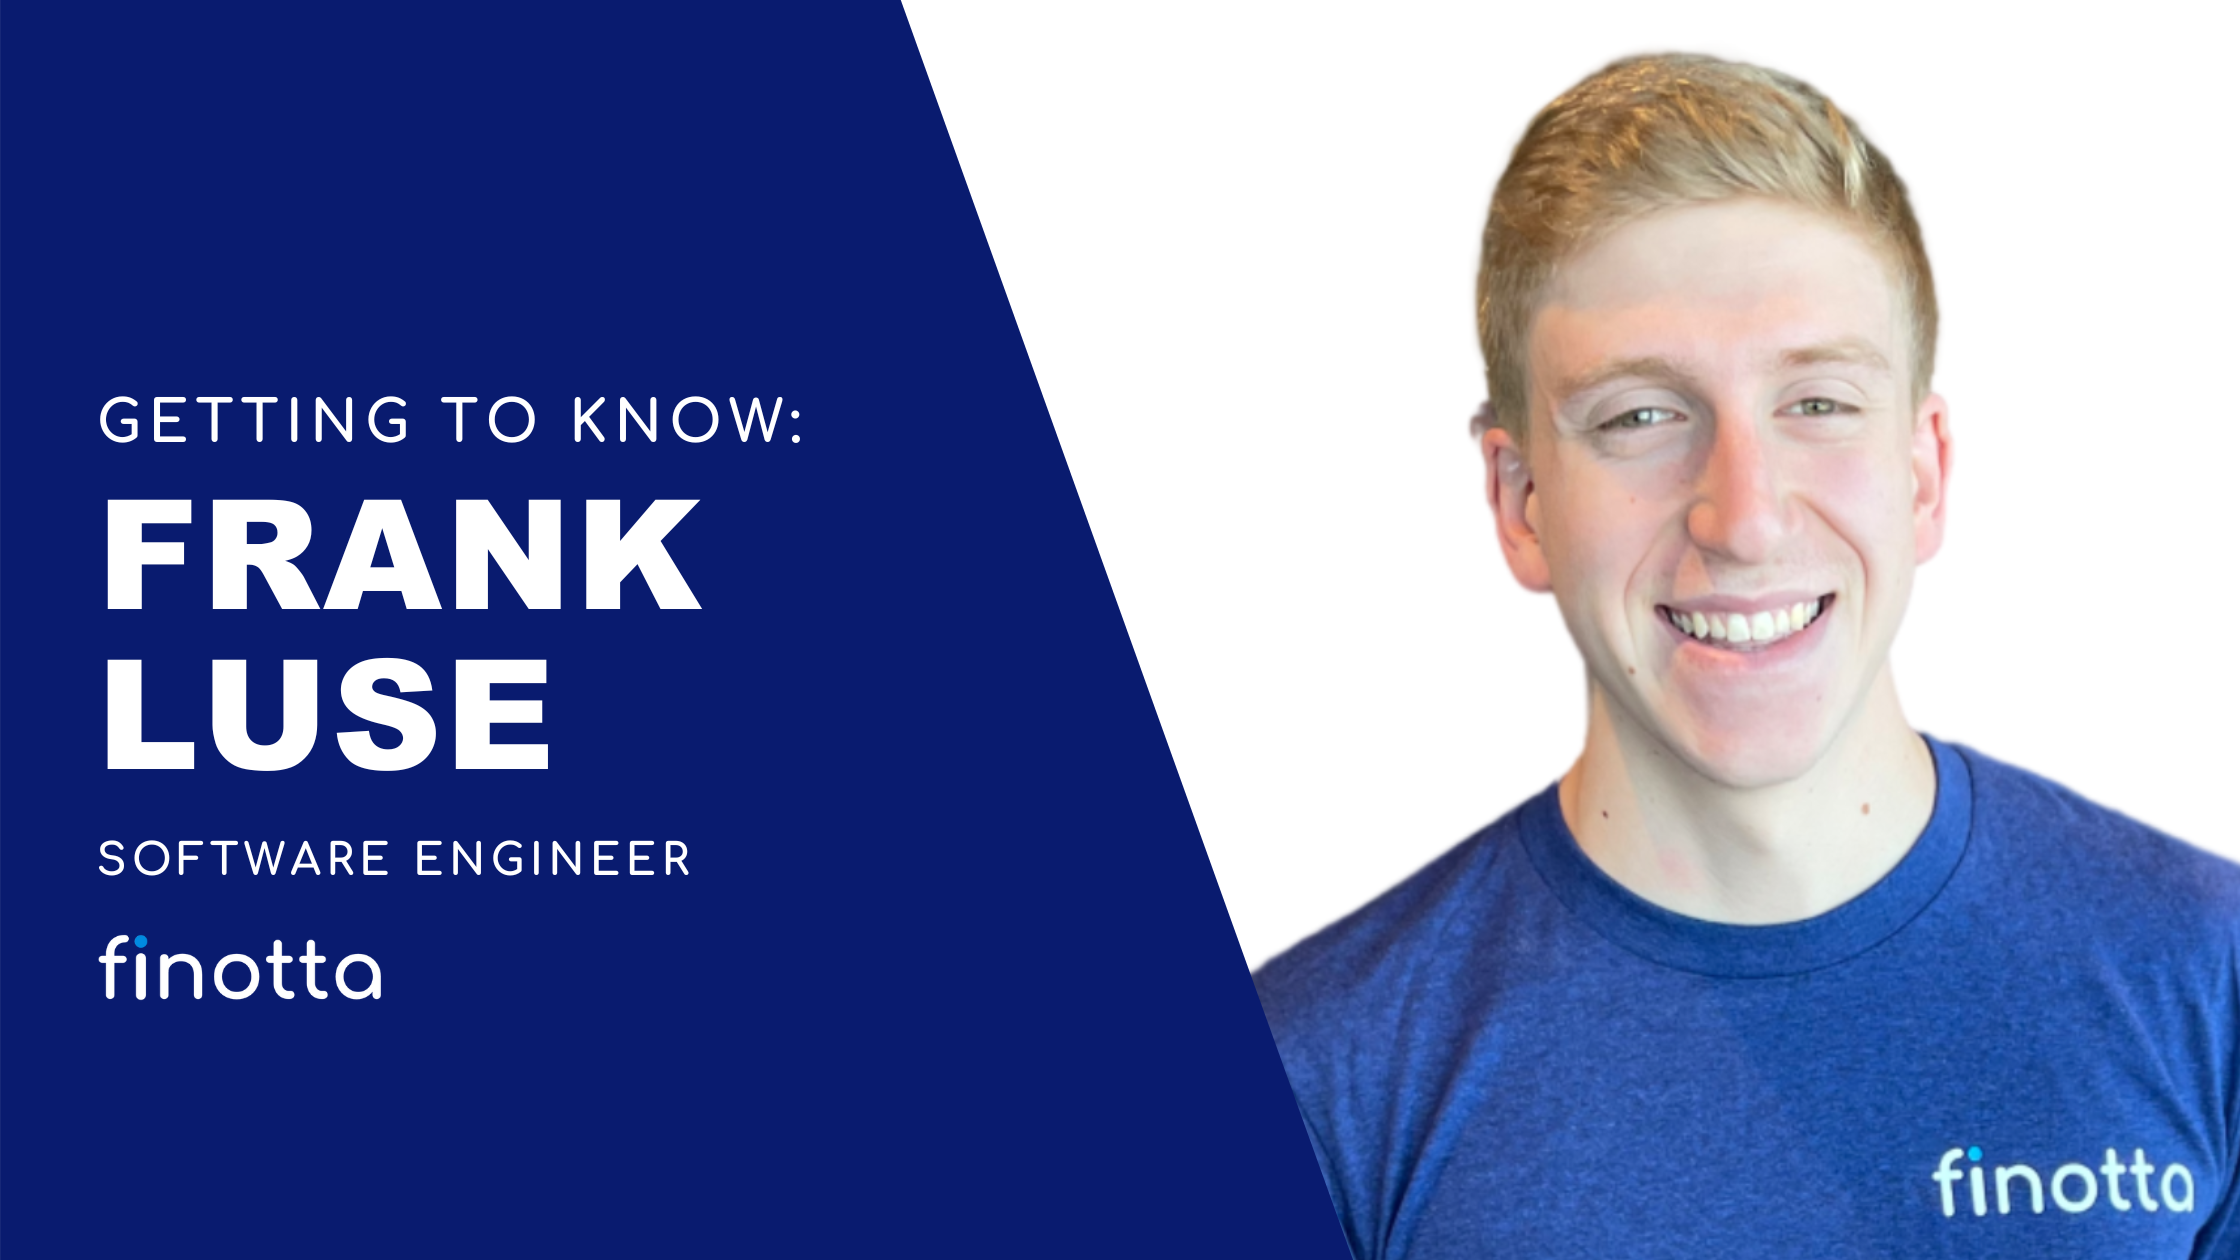 Getting to Know: Frank Luse, Software Engineer